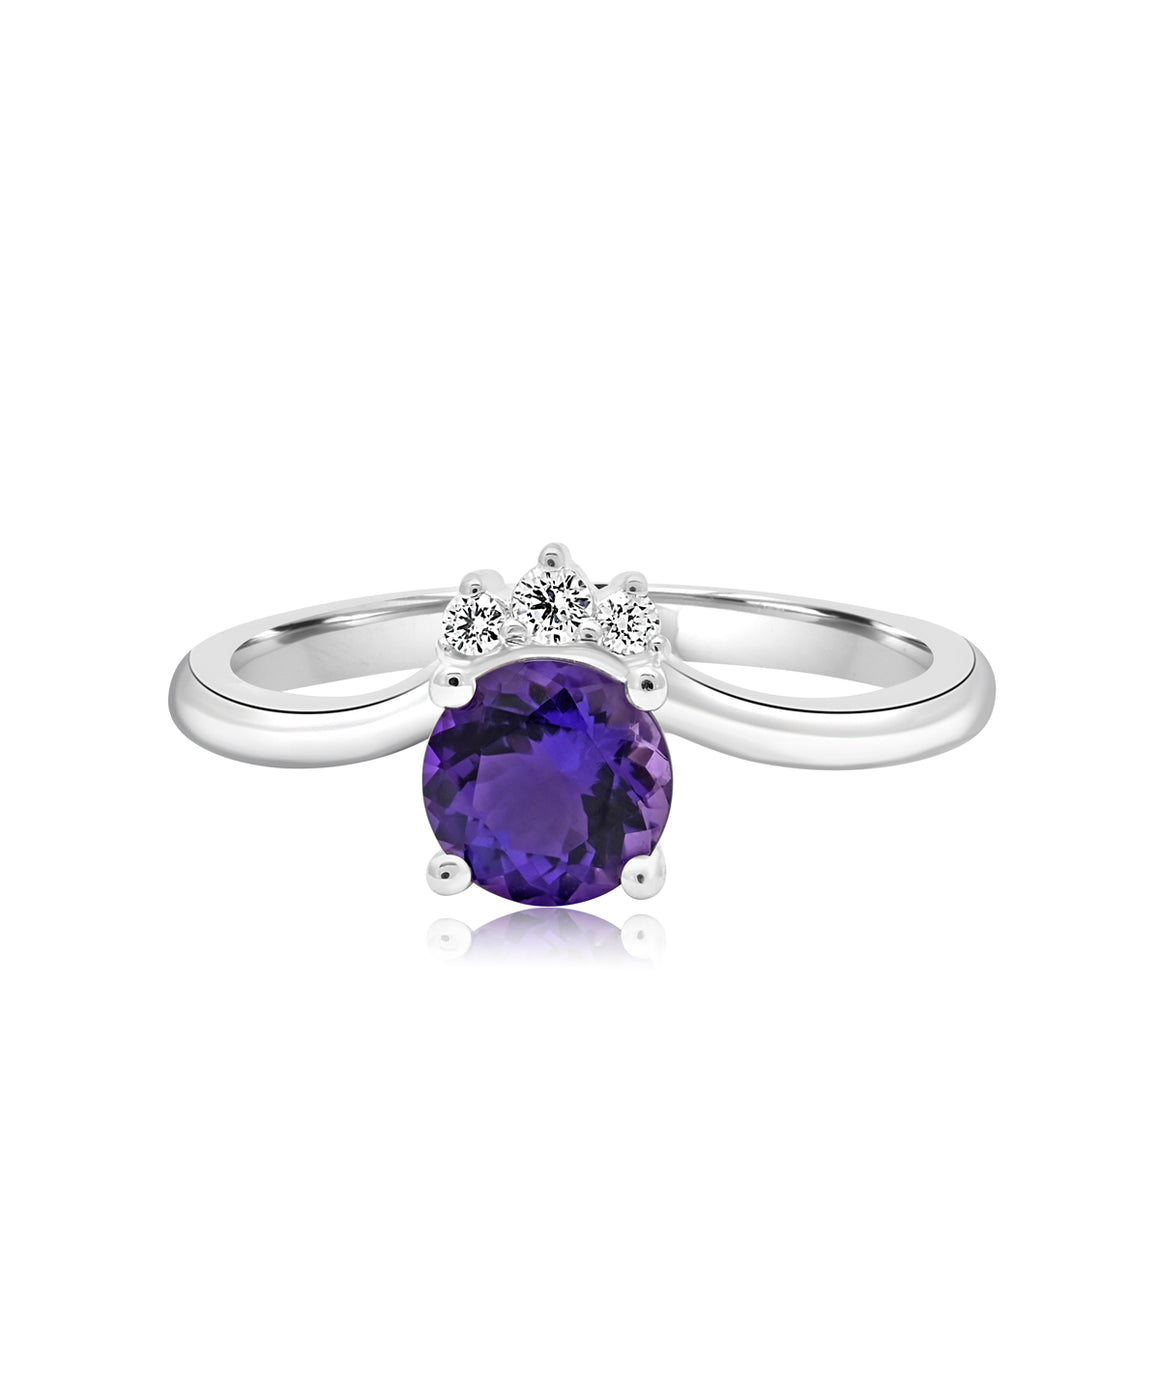 925 Sterling Silver Amethyst and Diamond Ring